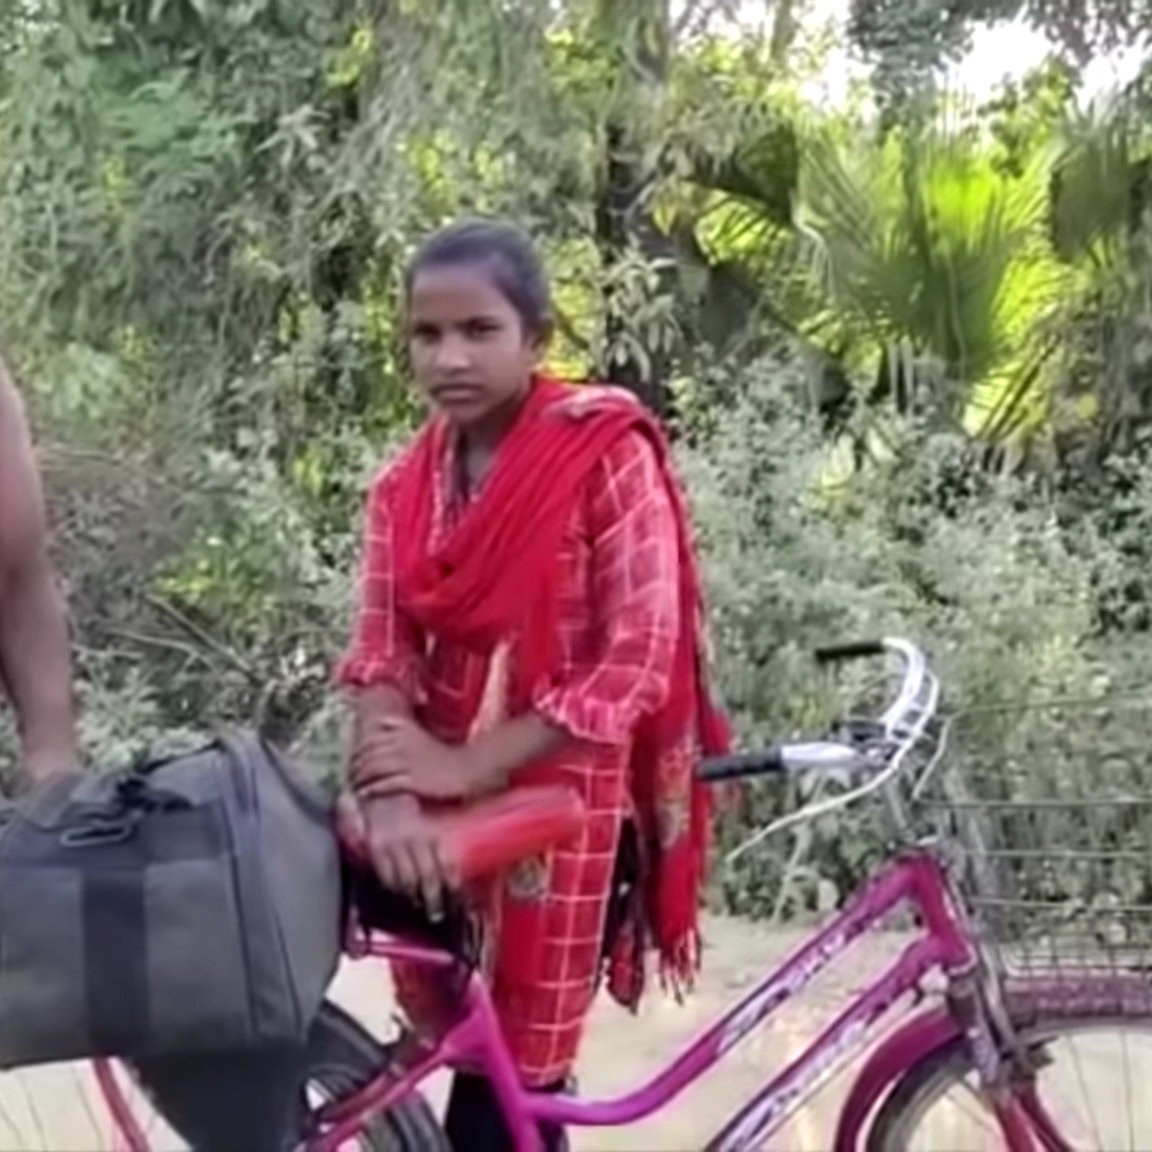 Lionhearted Girl Bikes Dad Across India Inspiring a Nation